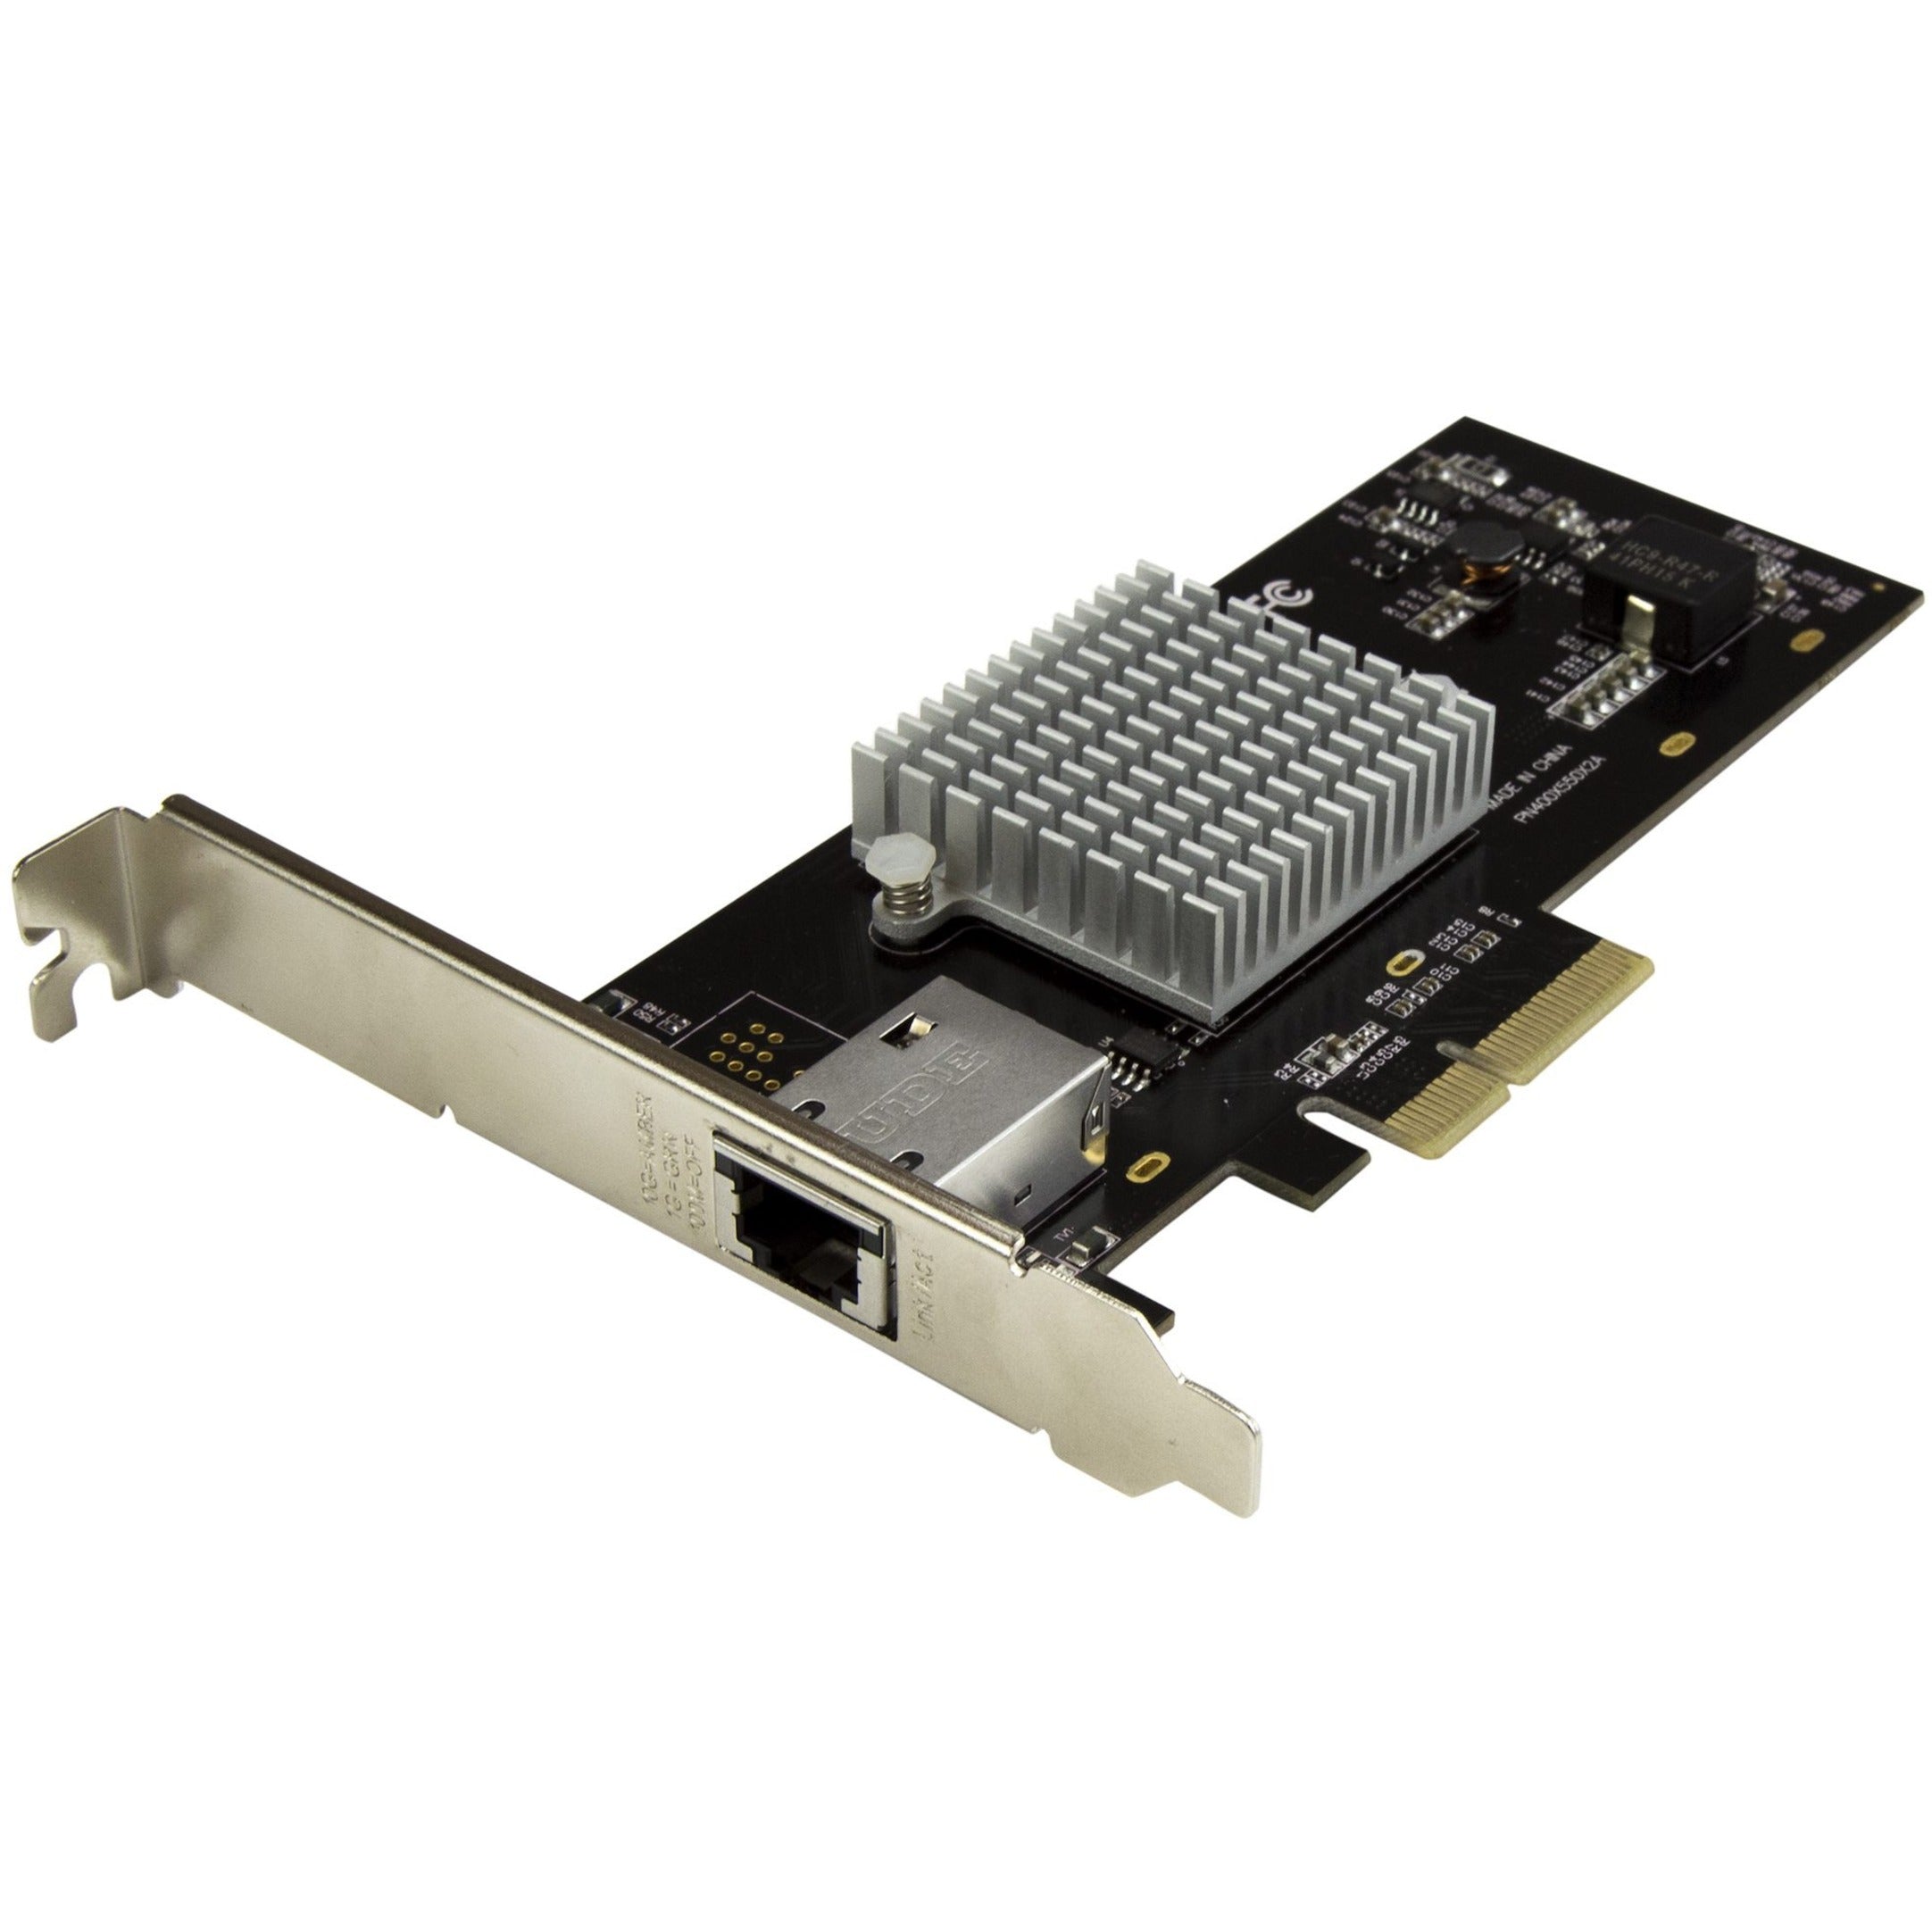 StarTech.com ST10000SPEXI 1-Port 10G Ethernet Network Card - PCI Express - Intel X550-AT Chip, 10GbE NIC with 10GBase-T / NBASE-T Compliant